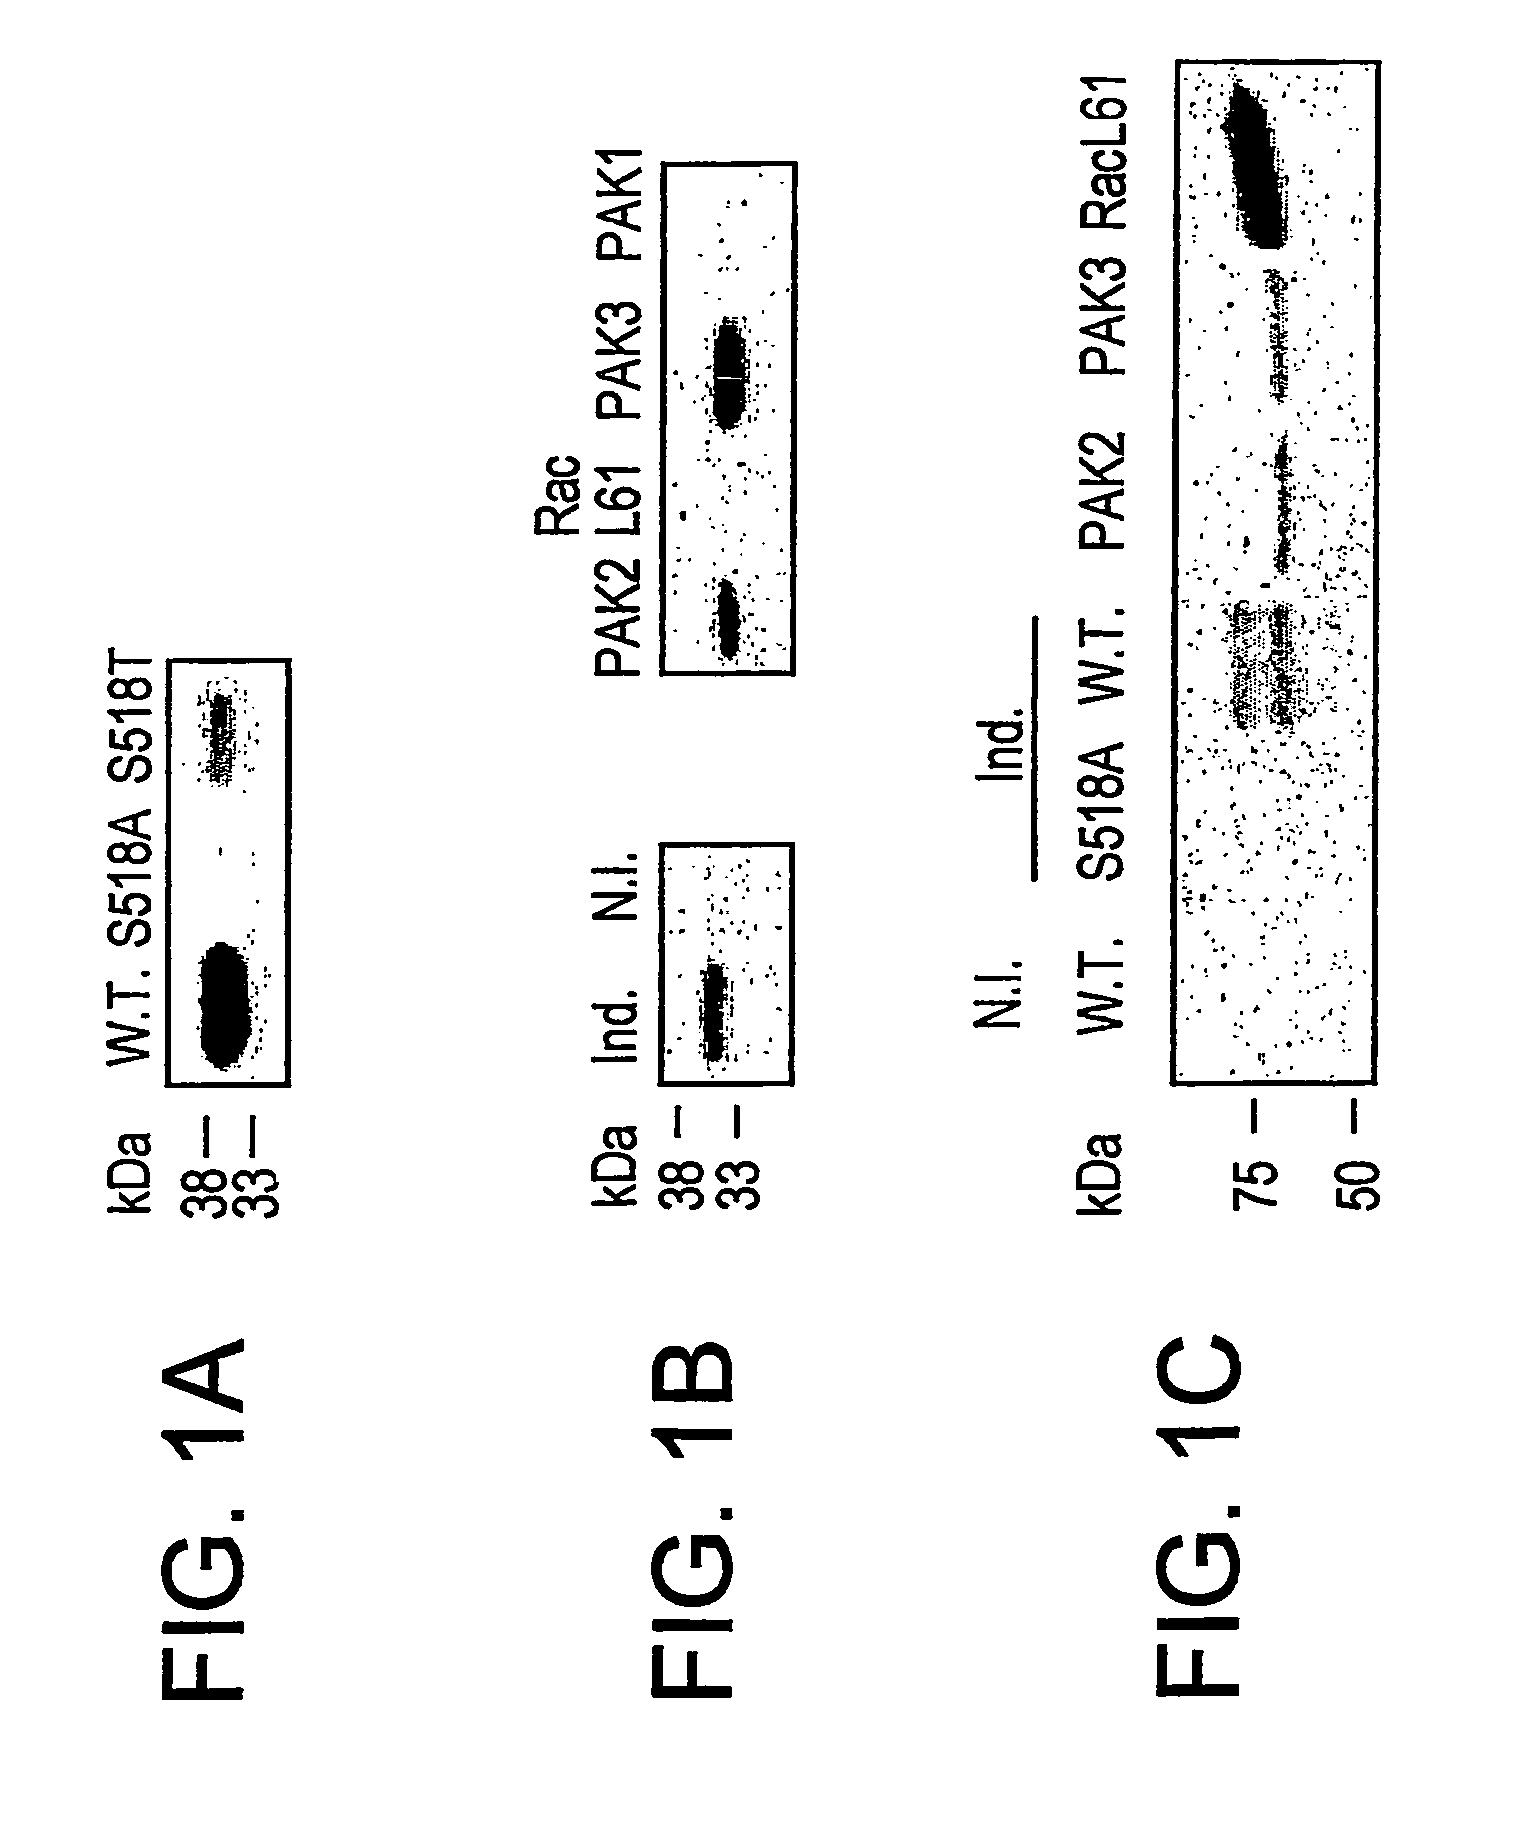 Methods of screening for compounds that decrease phosphorylation of merlin and may be useful in cancer treatment